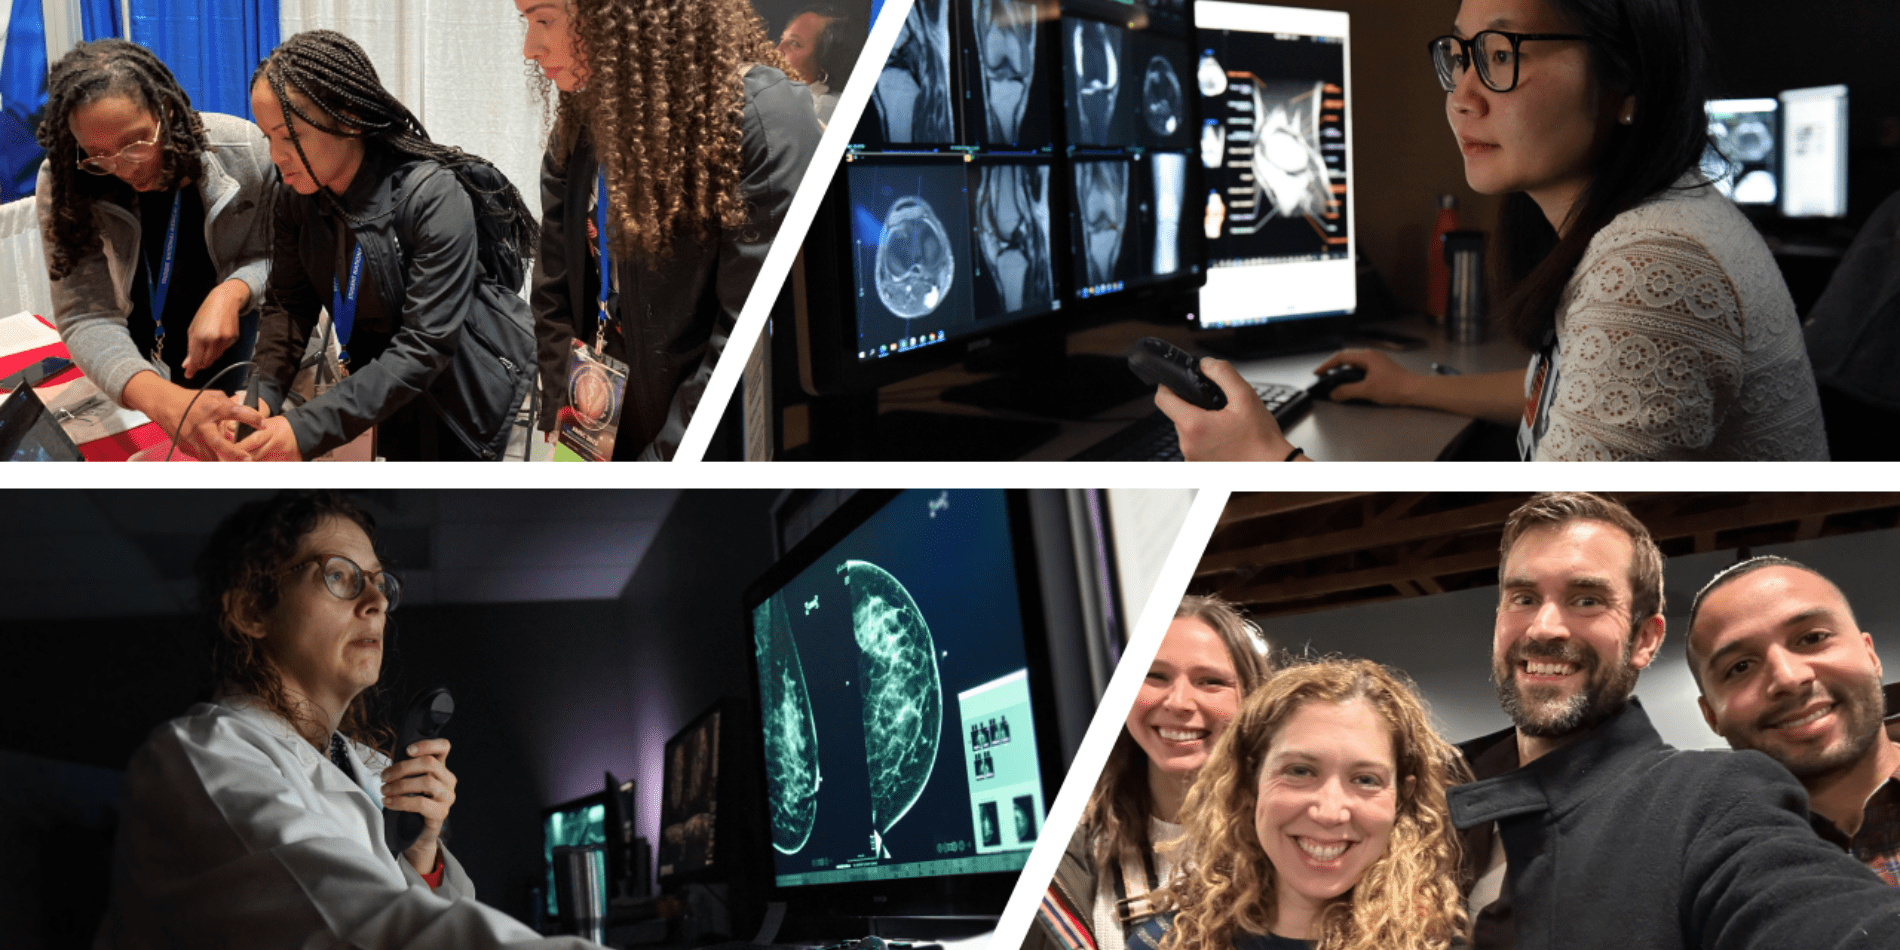 Four image-collage; top left shows a Black radiology resident showing two Black medical student how to use an ultrasound; top right image shows an Asian radiology resident looking at bone scans on a monitor; bottom left image shows a  white radiologist looking a breast images; bottom right image shows four individuals smilling toward the camera for a selfie-style image